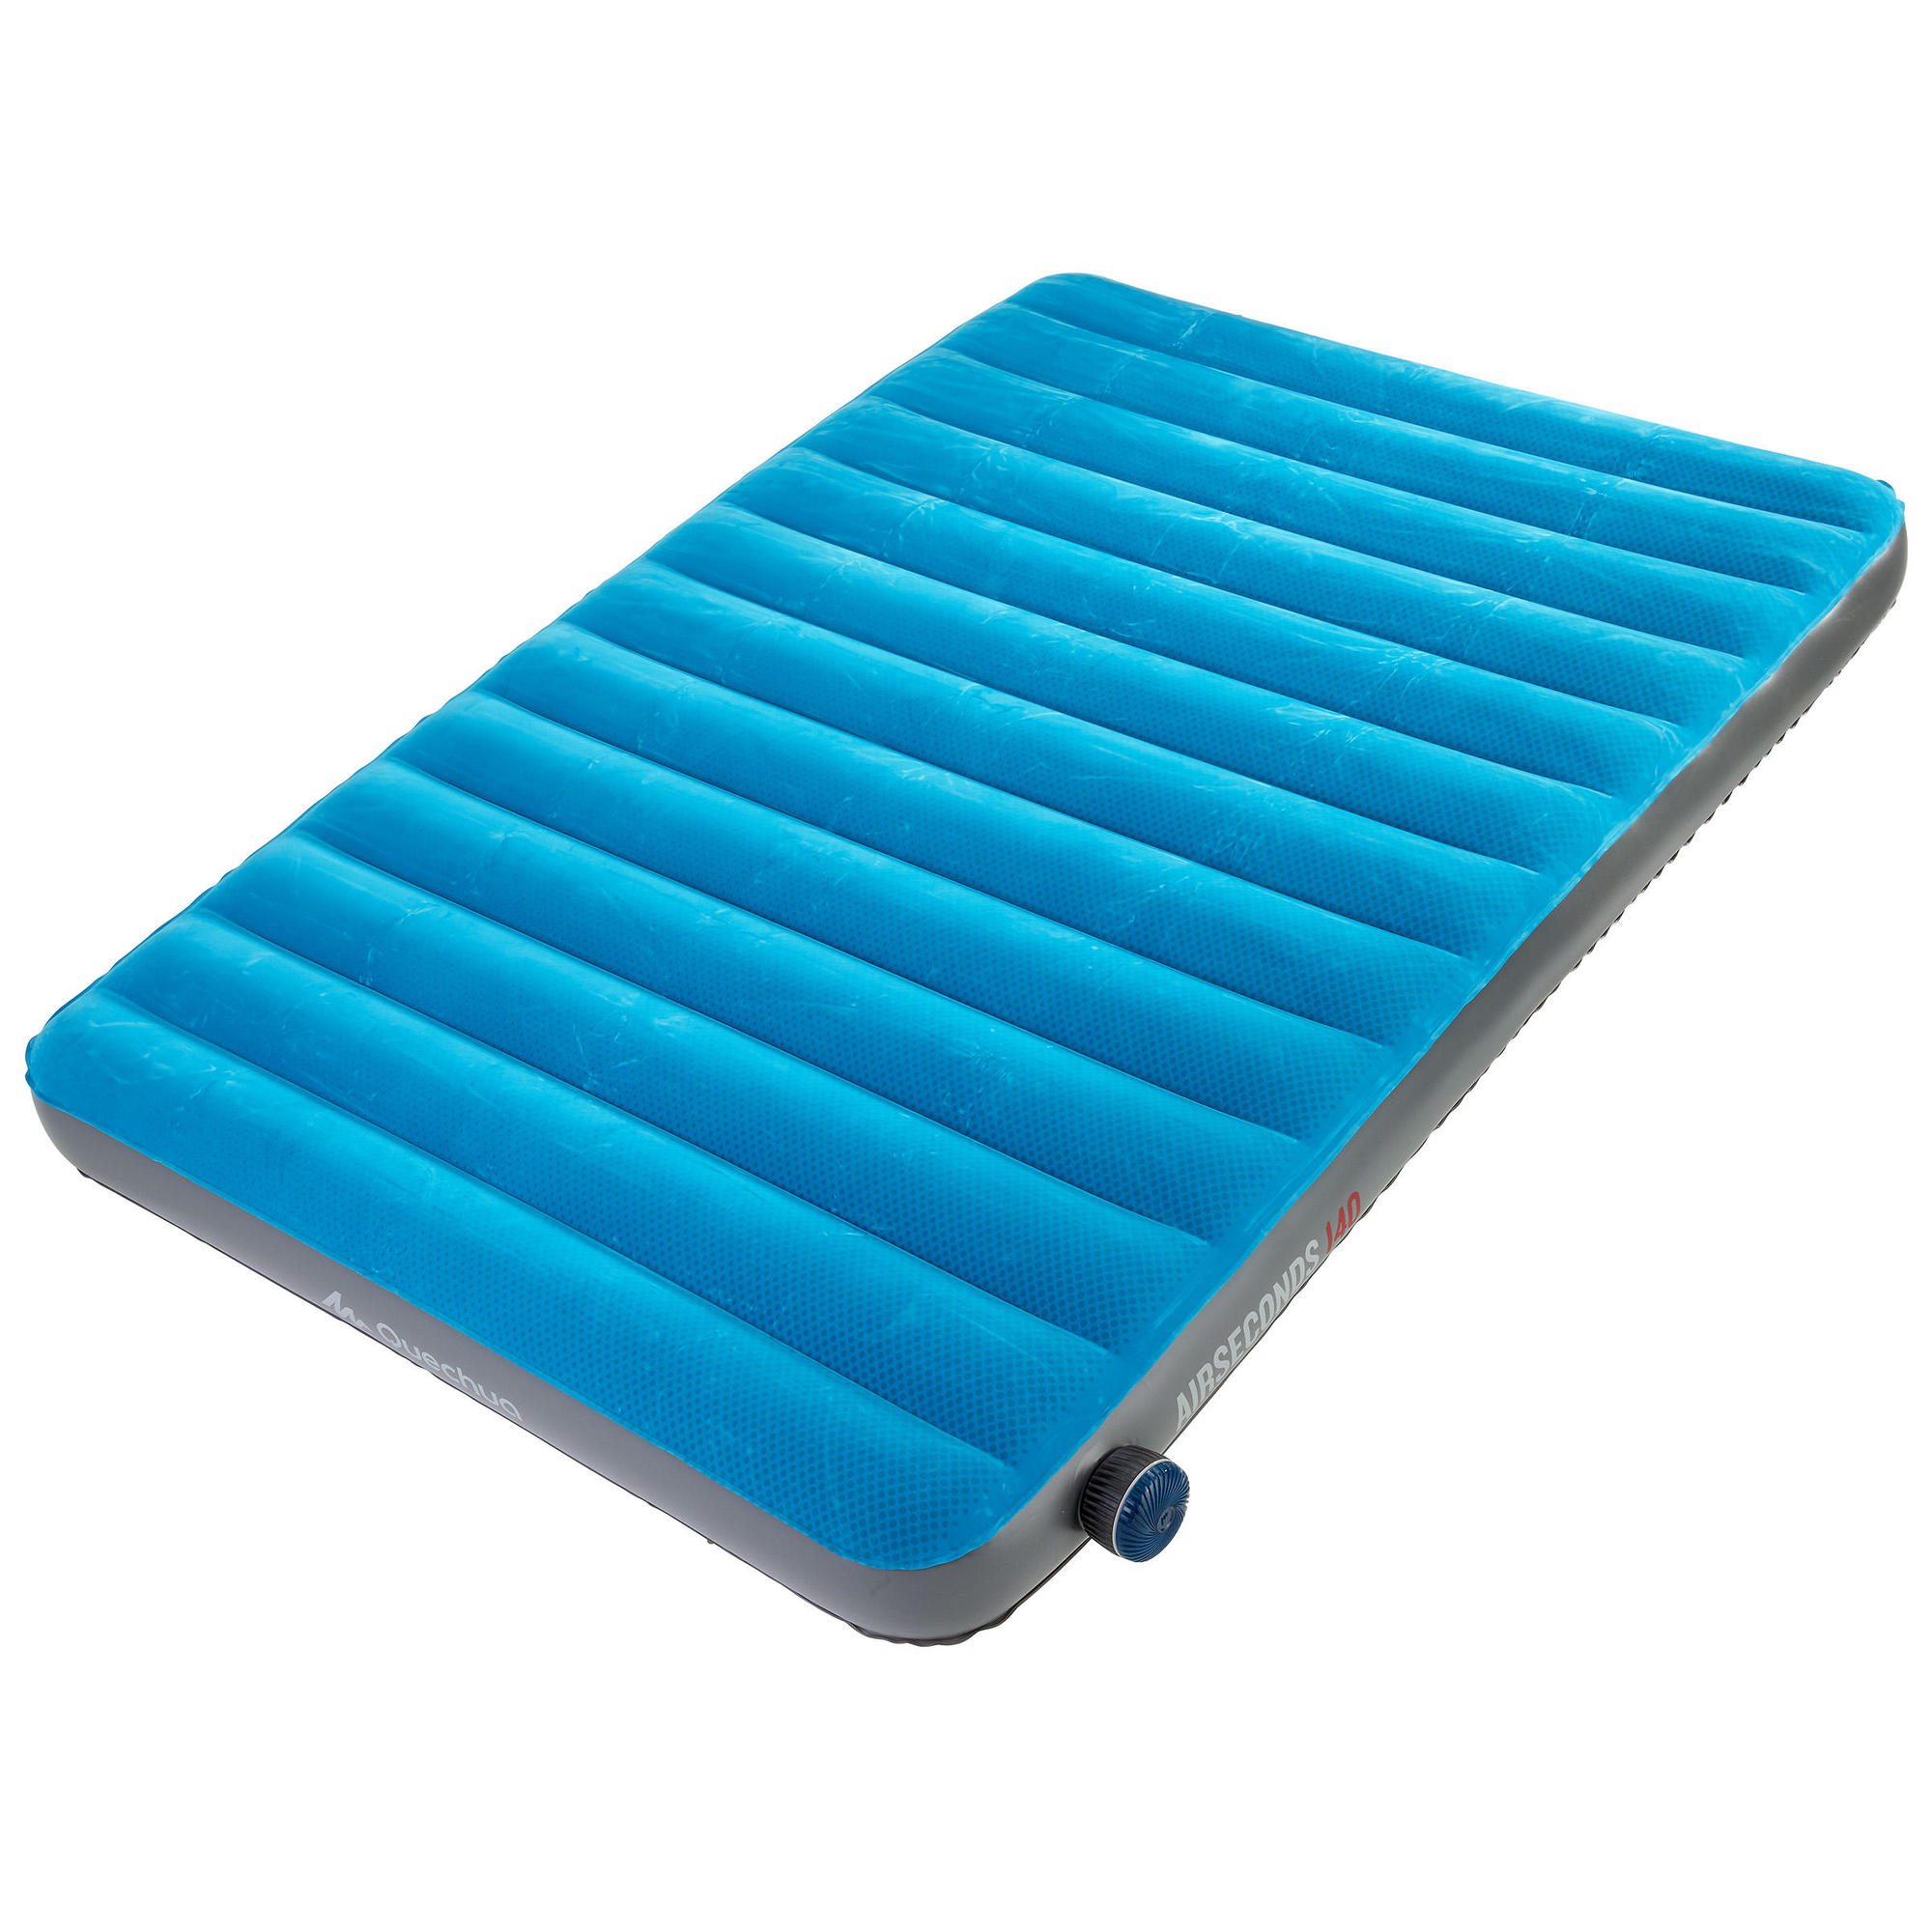 Decathlon Quechua Air seconds, 55" Inflatable Camping Mattress, Quick Inflating, 2 Person, Queen, Blue - image 1 of 13